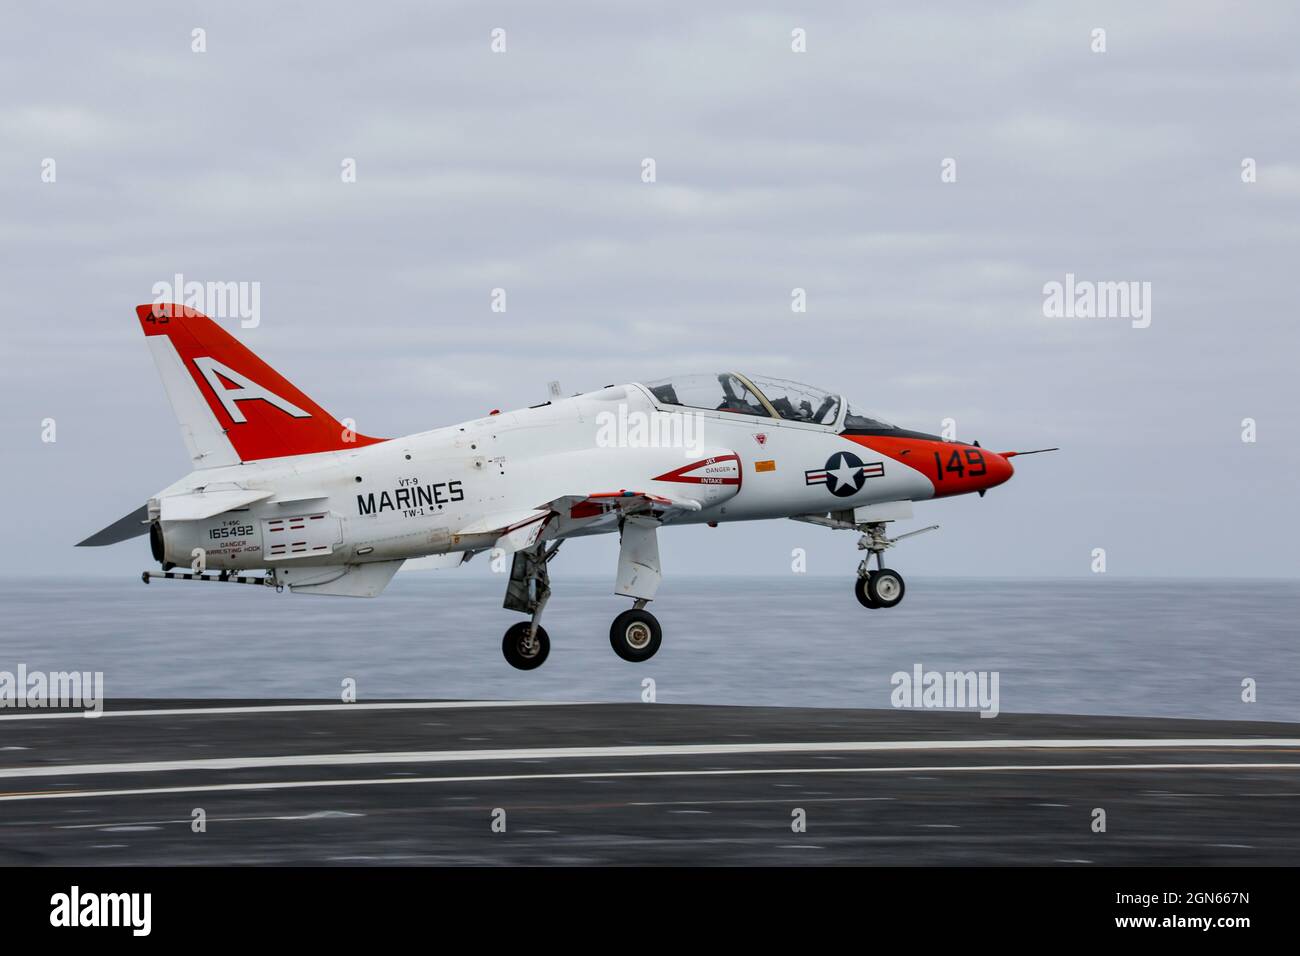 PACIFIC OCEAN (Sep. 2, 2021) A T-45C Goshawk, assigned to Training Air Wing 1 out of Naval Air Station Kingsville, Texas, performs a touch-and-go on the flight deck of the aircraft carrier USS Abraham Lincoln (CVN 72). Abraham Lincoln is underway conducting routine operations in the U.S. 3rd Fleet area of operations. (U.S. Navy photo by Mass Communication Specialist 3rd Class Michael Singley/Released) Stock Photo